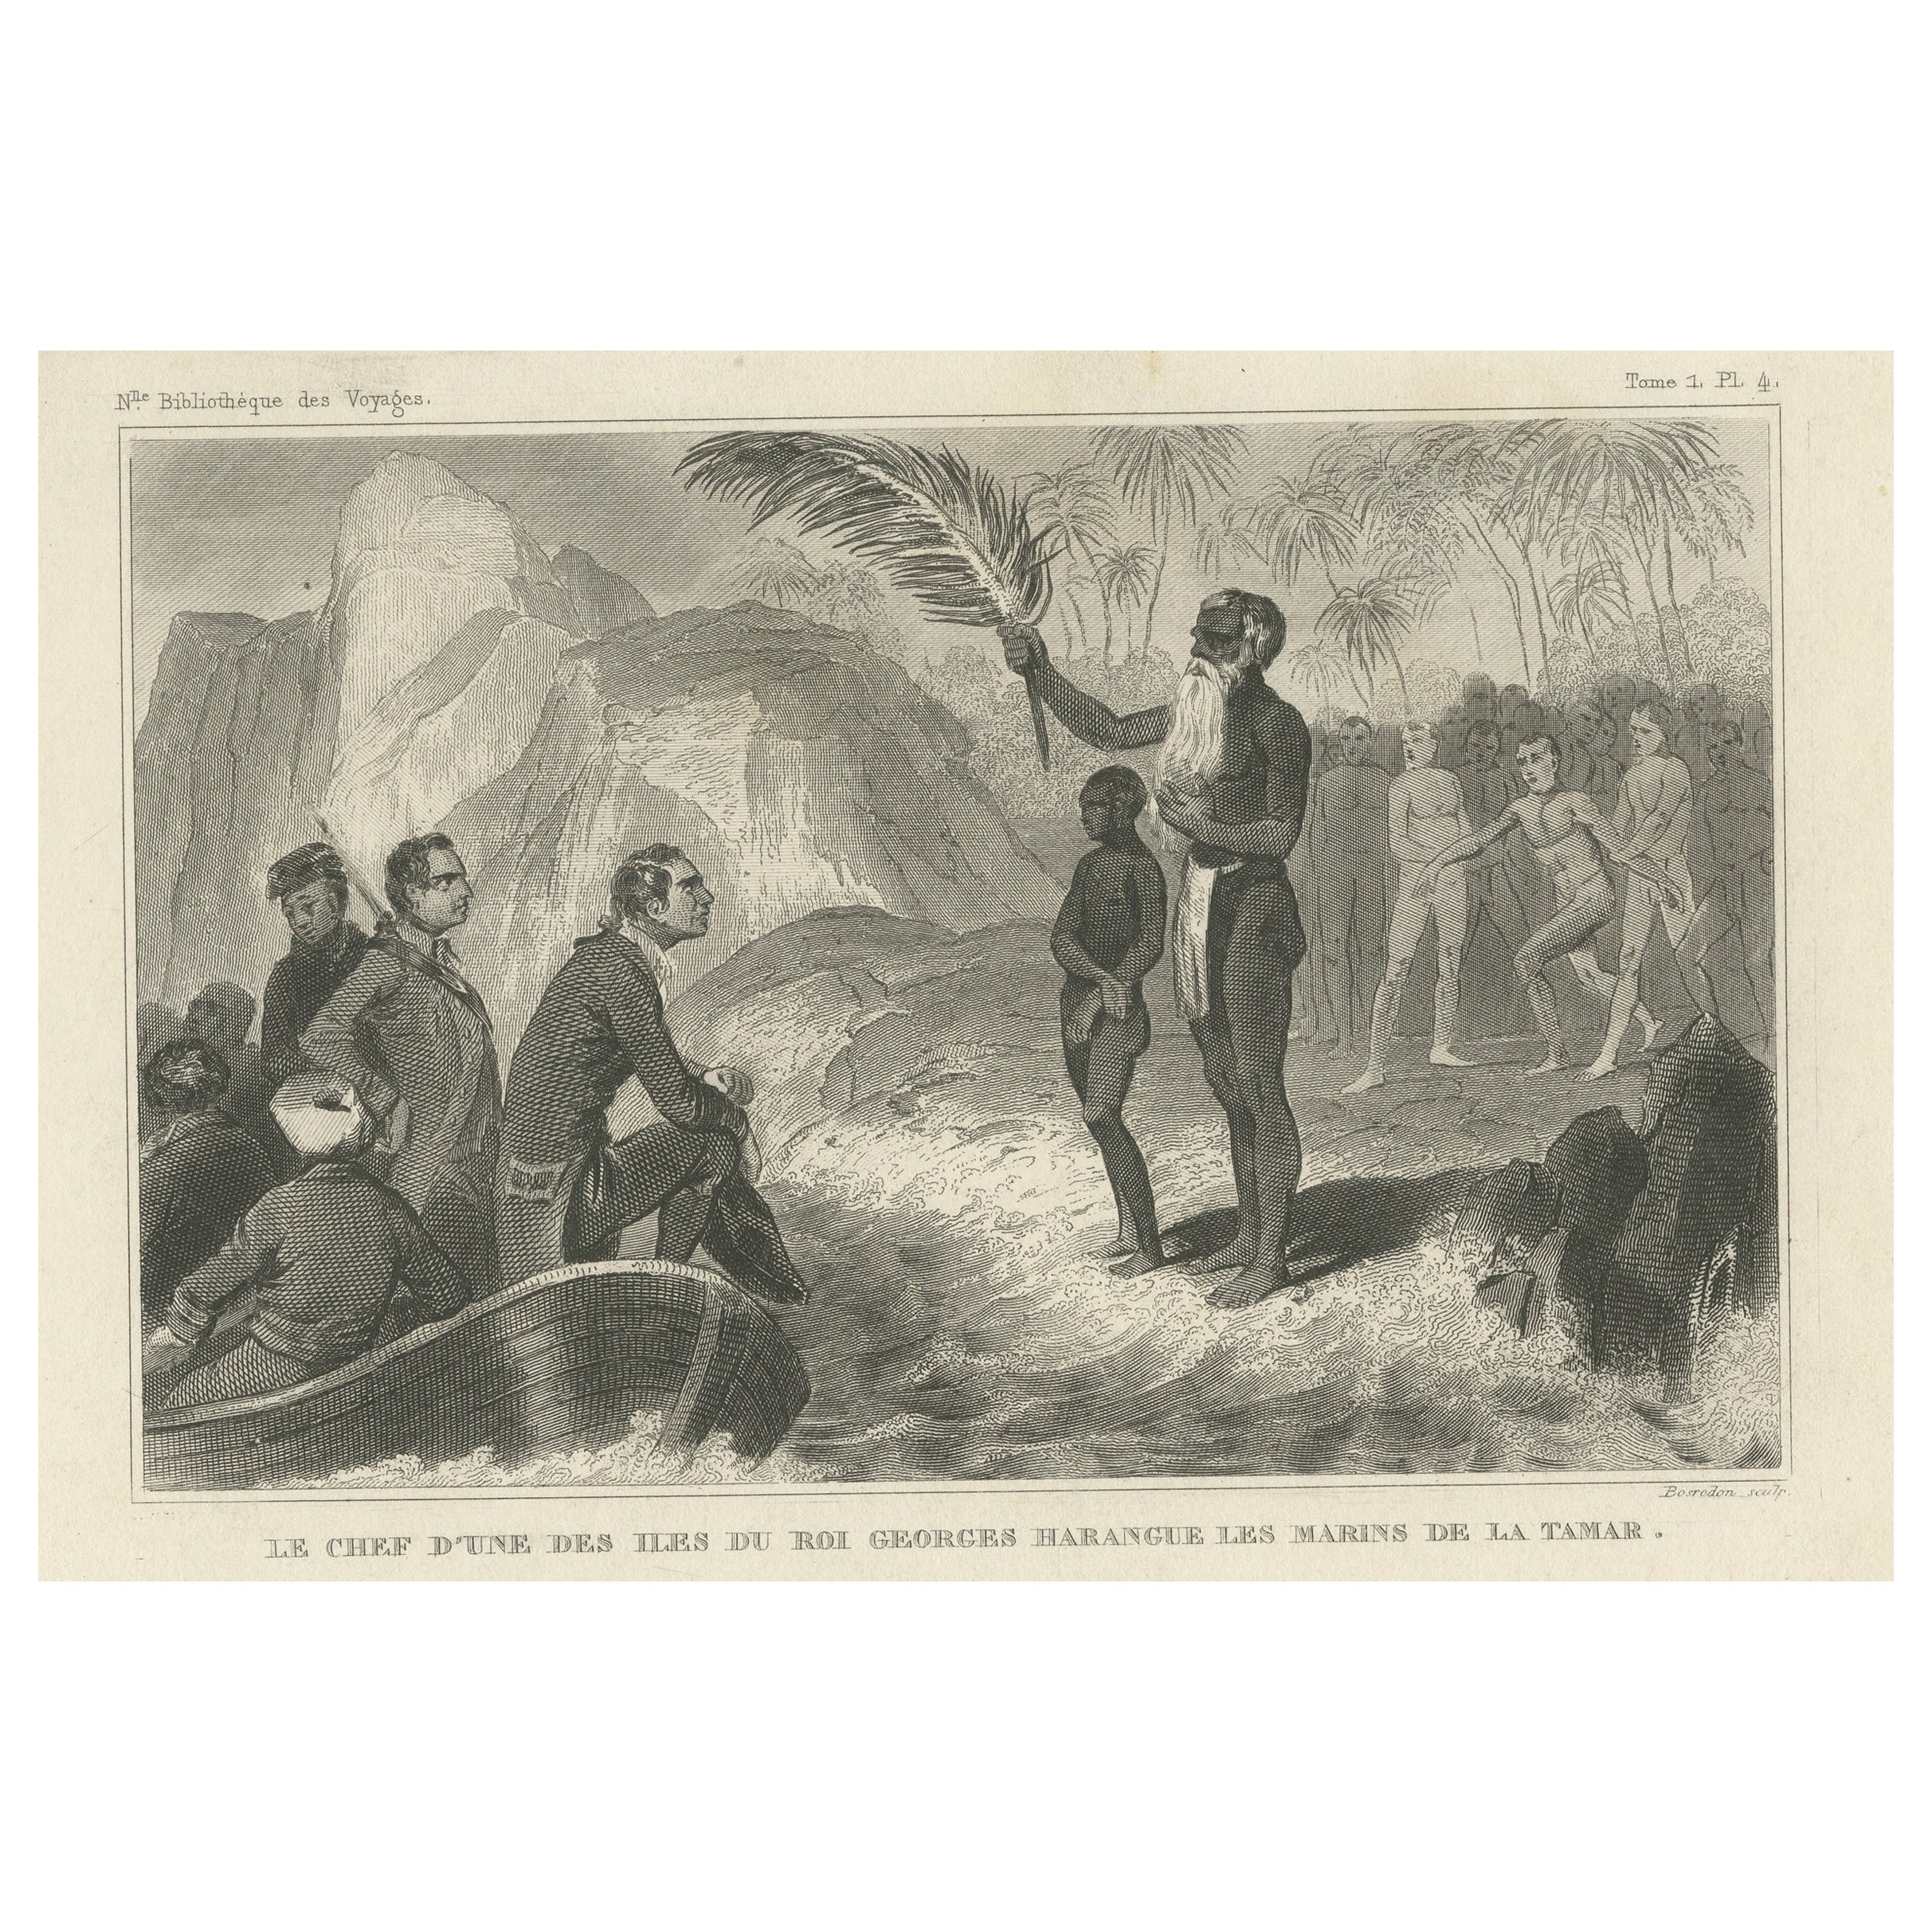 Antique Print of the Chief of One of the King George Islands For Sale